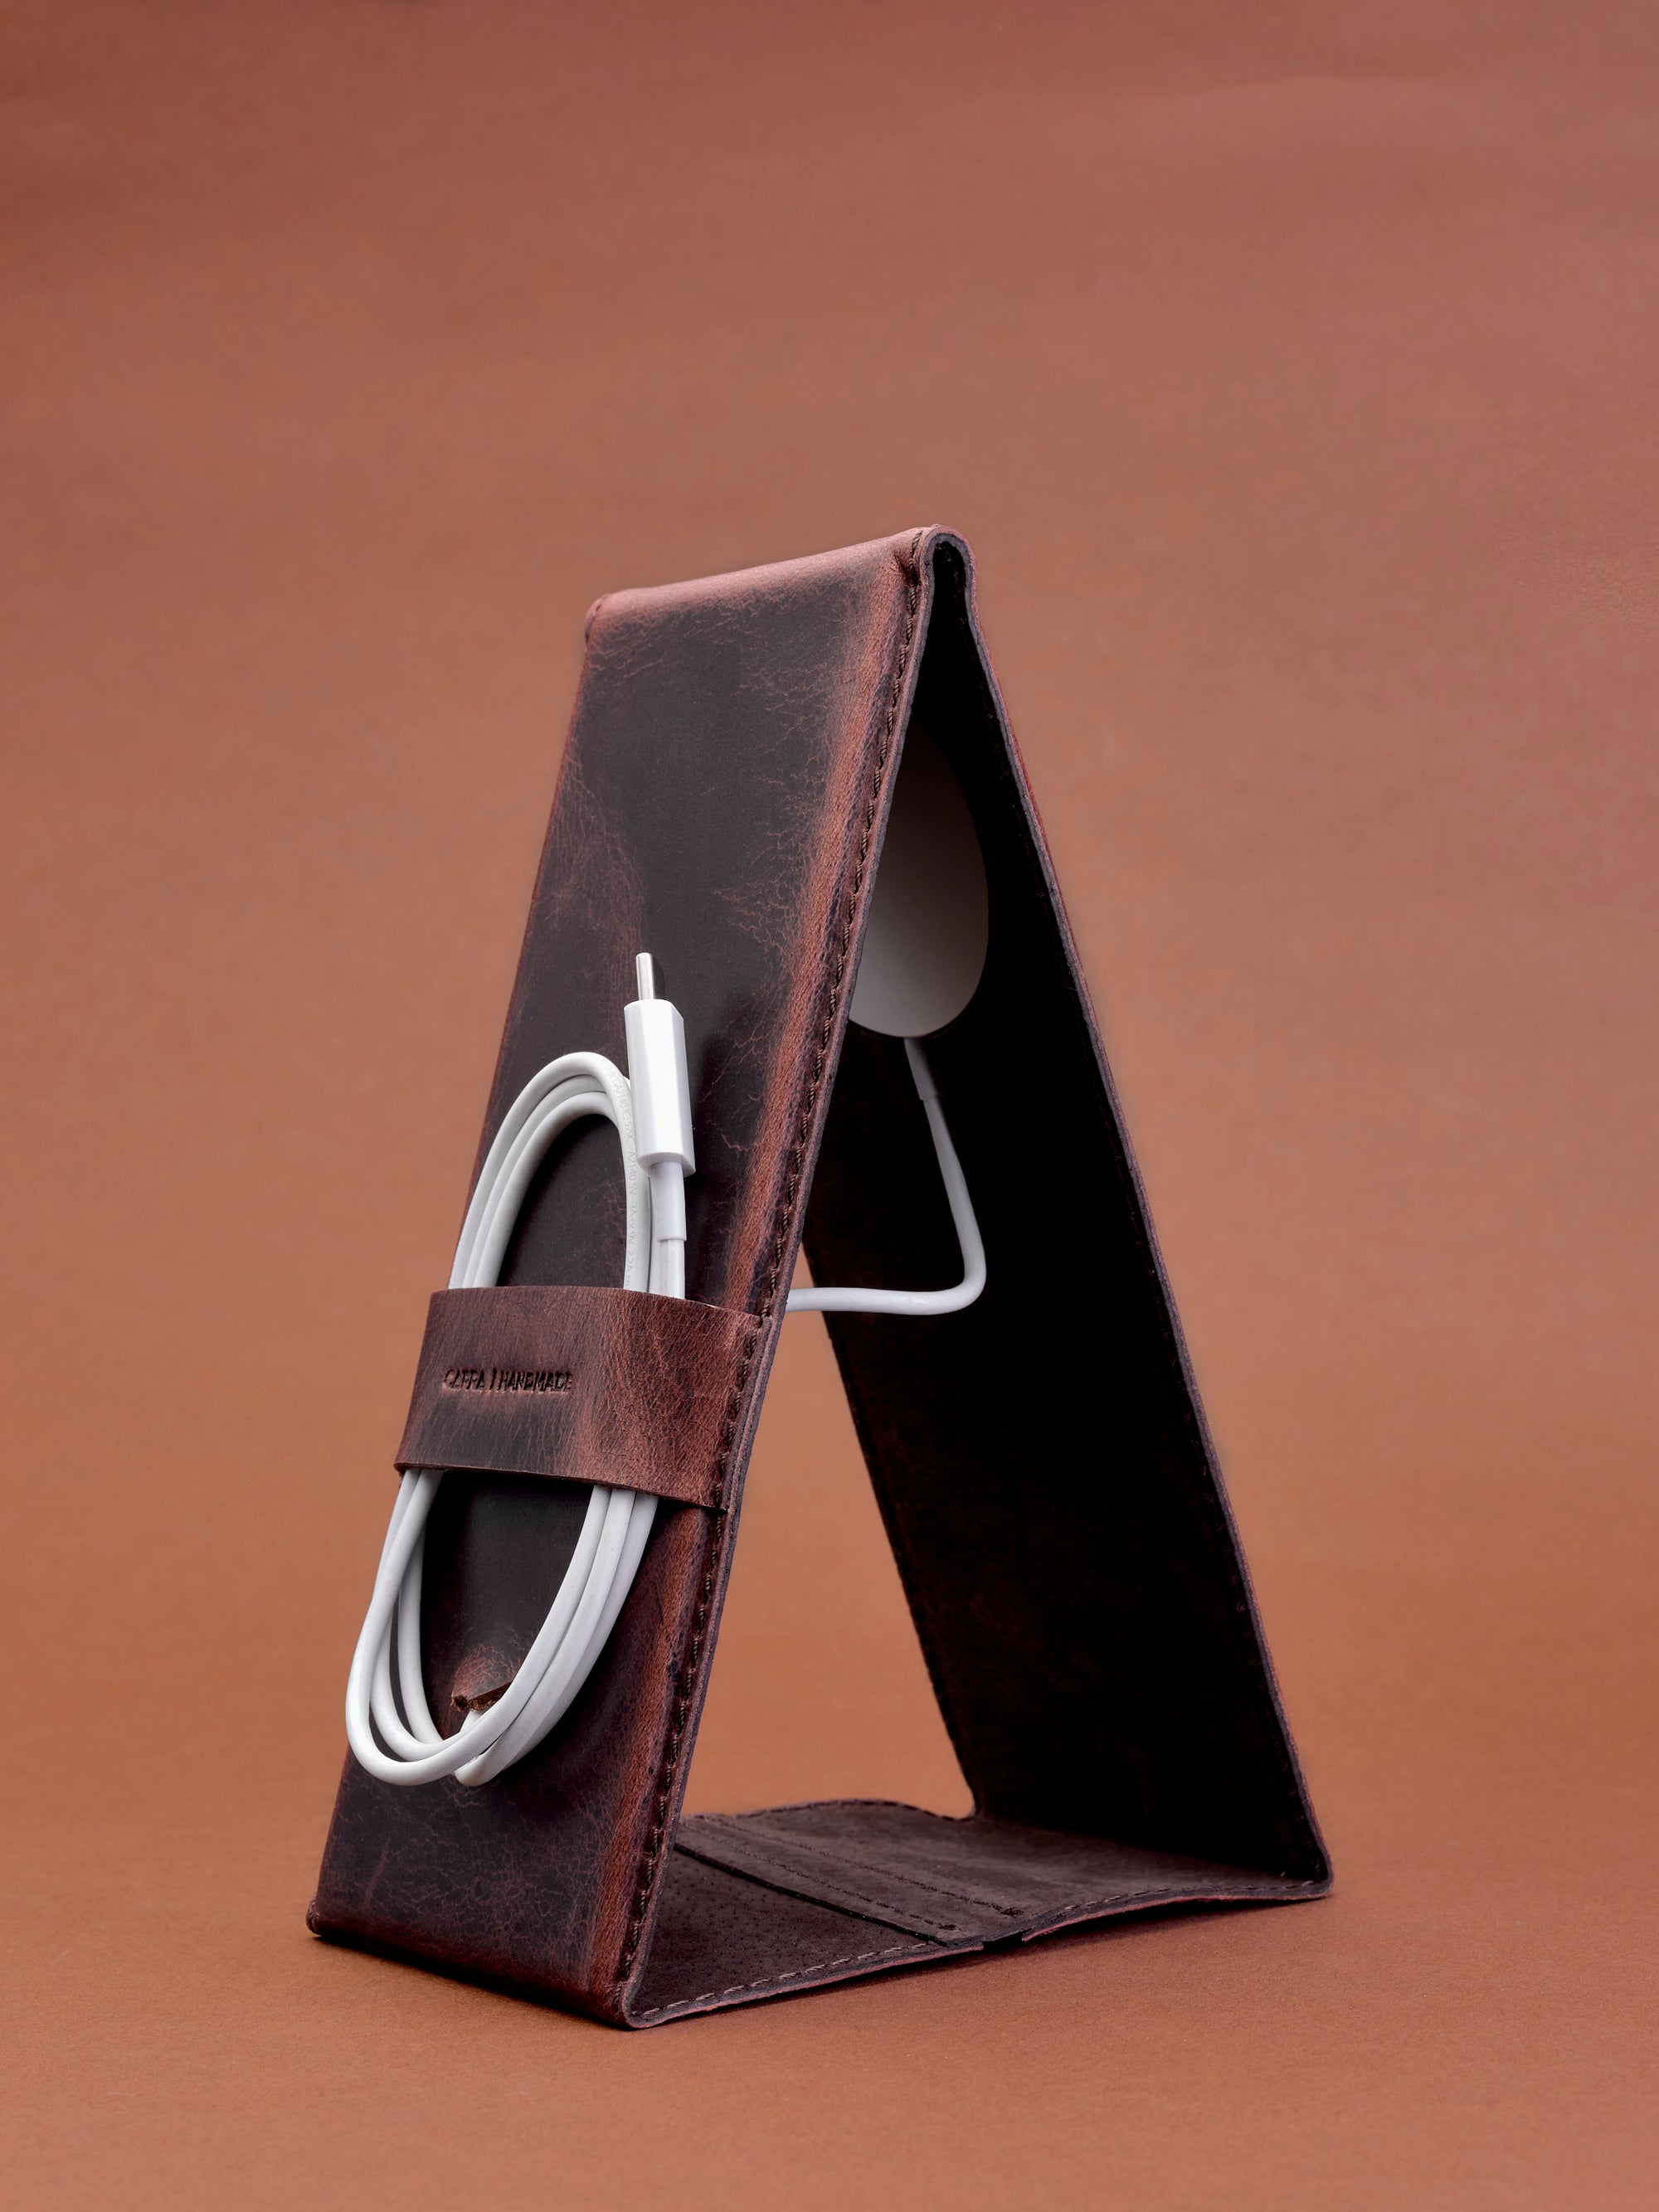 Easy to carry with MagSafe Charger inside. MagSafe iPhone Holder Stand Distressed Cognac by Capra Leather